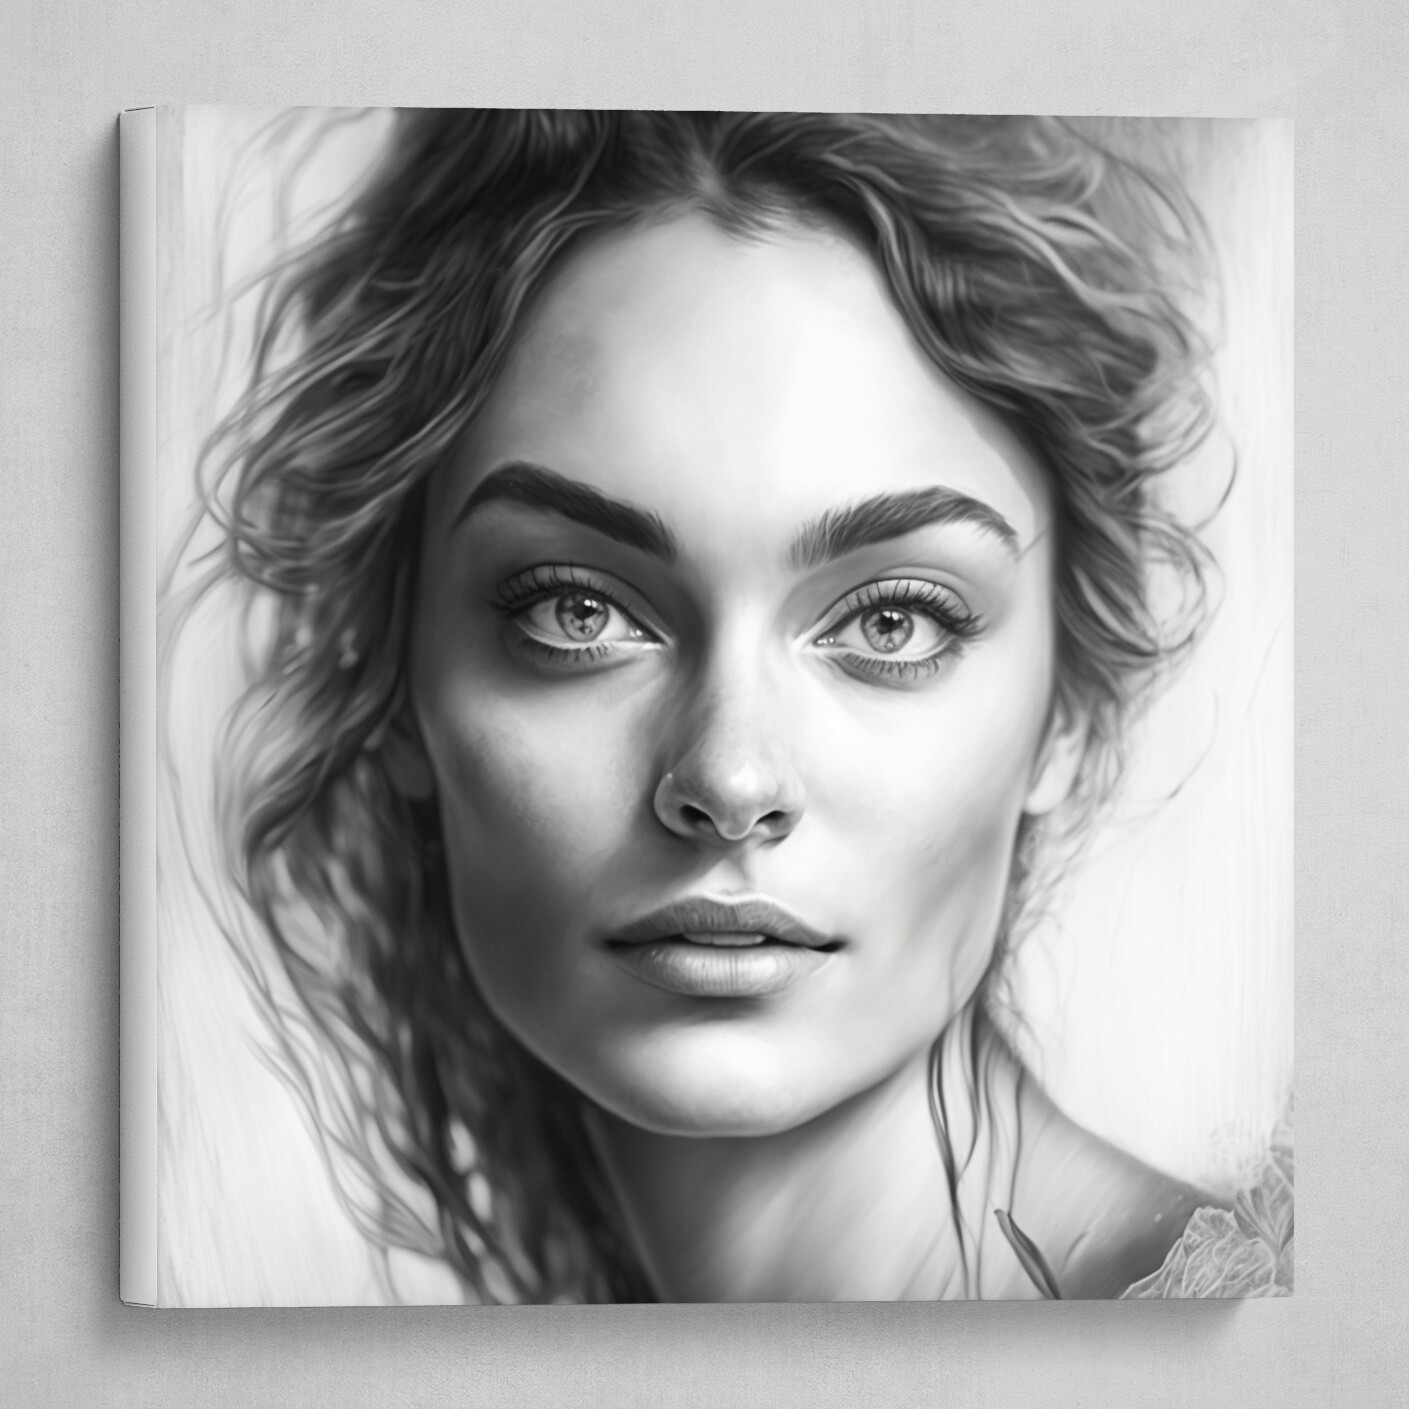 The Beauty of Pencil Drawings